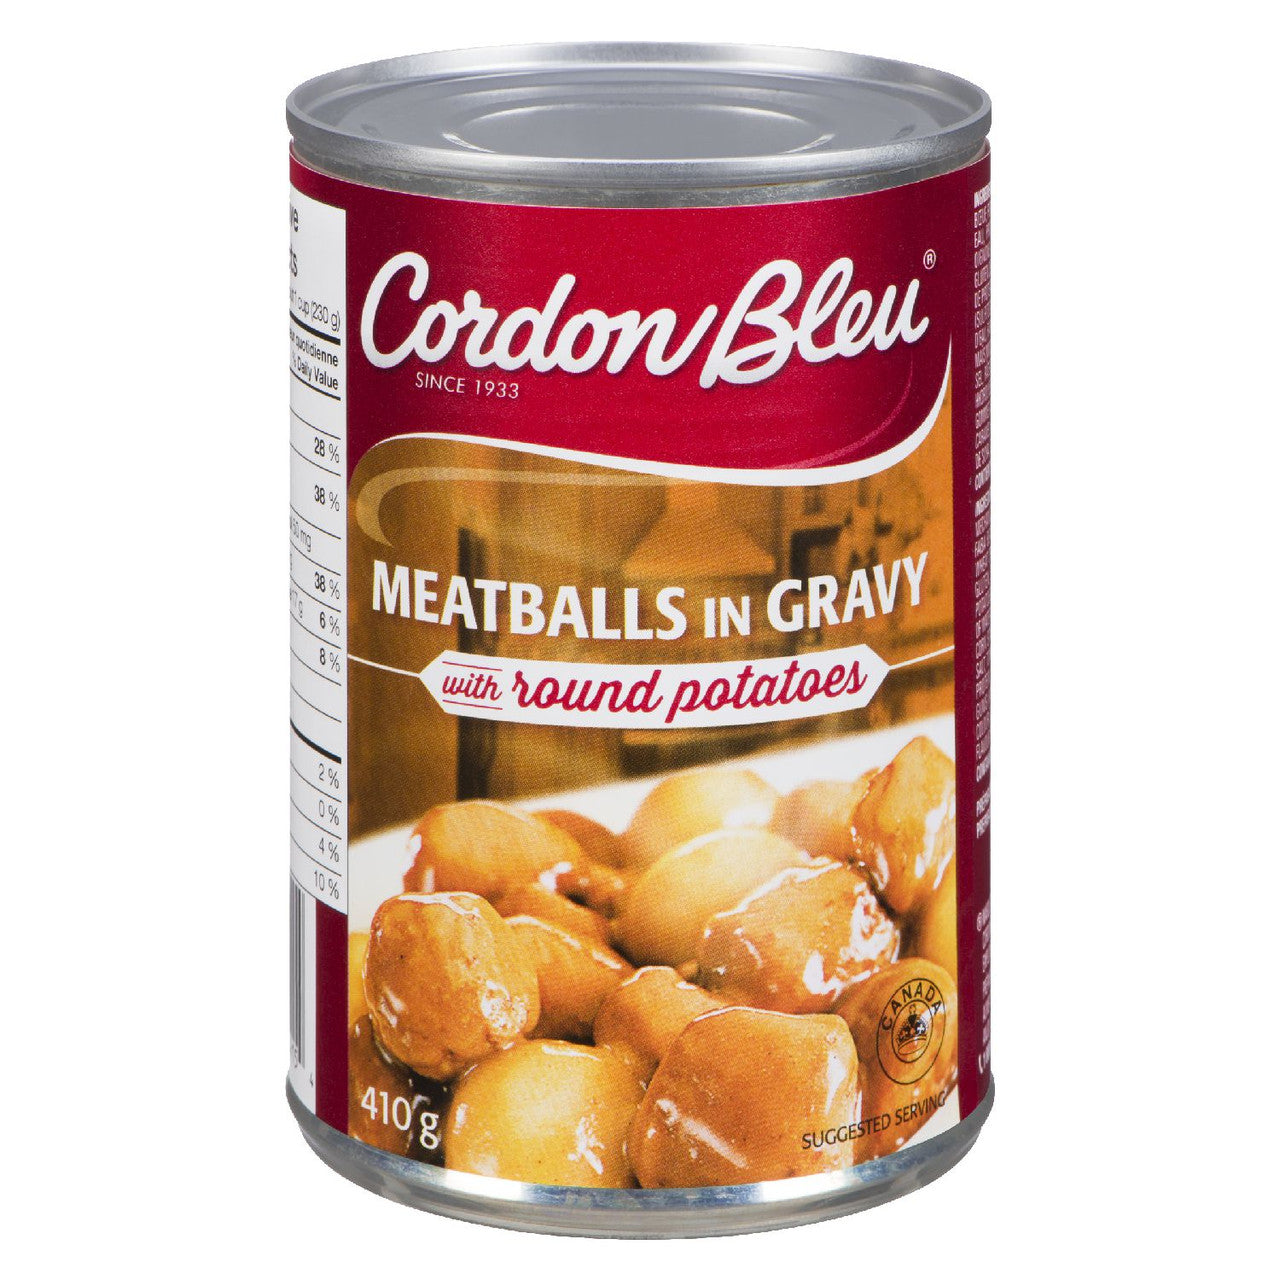 Cordon Bleu Meatballs in Gravy with Round Potatoes soup 410g/14.5 oz {Imported from Canada}